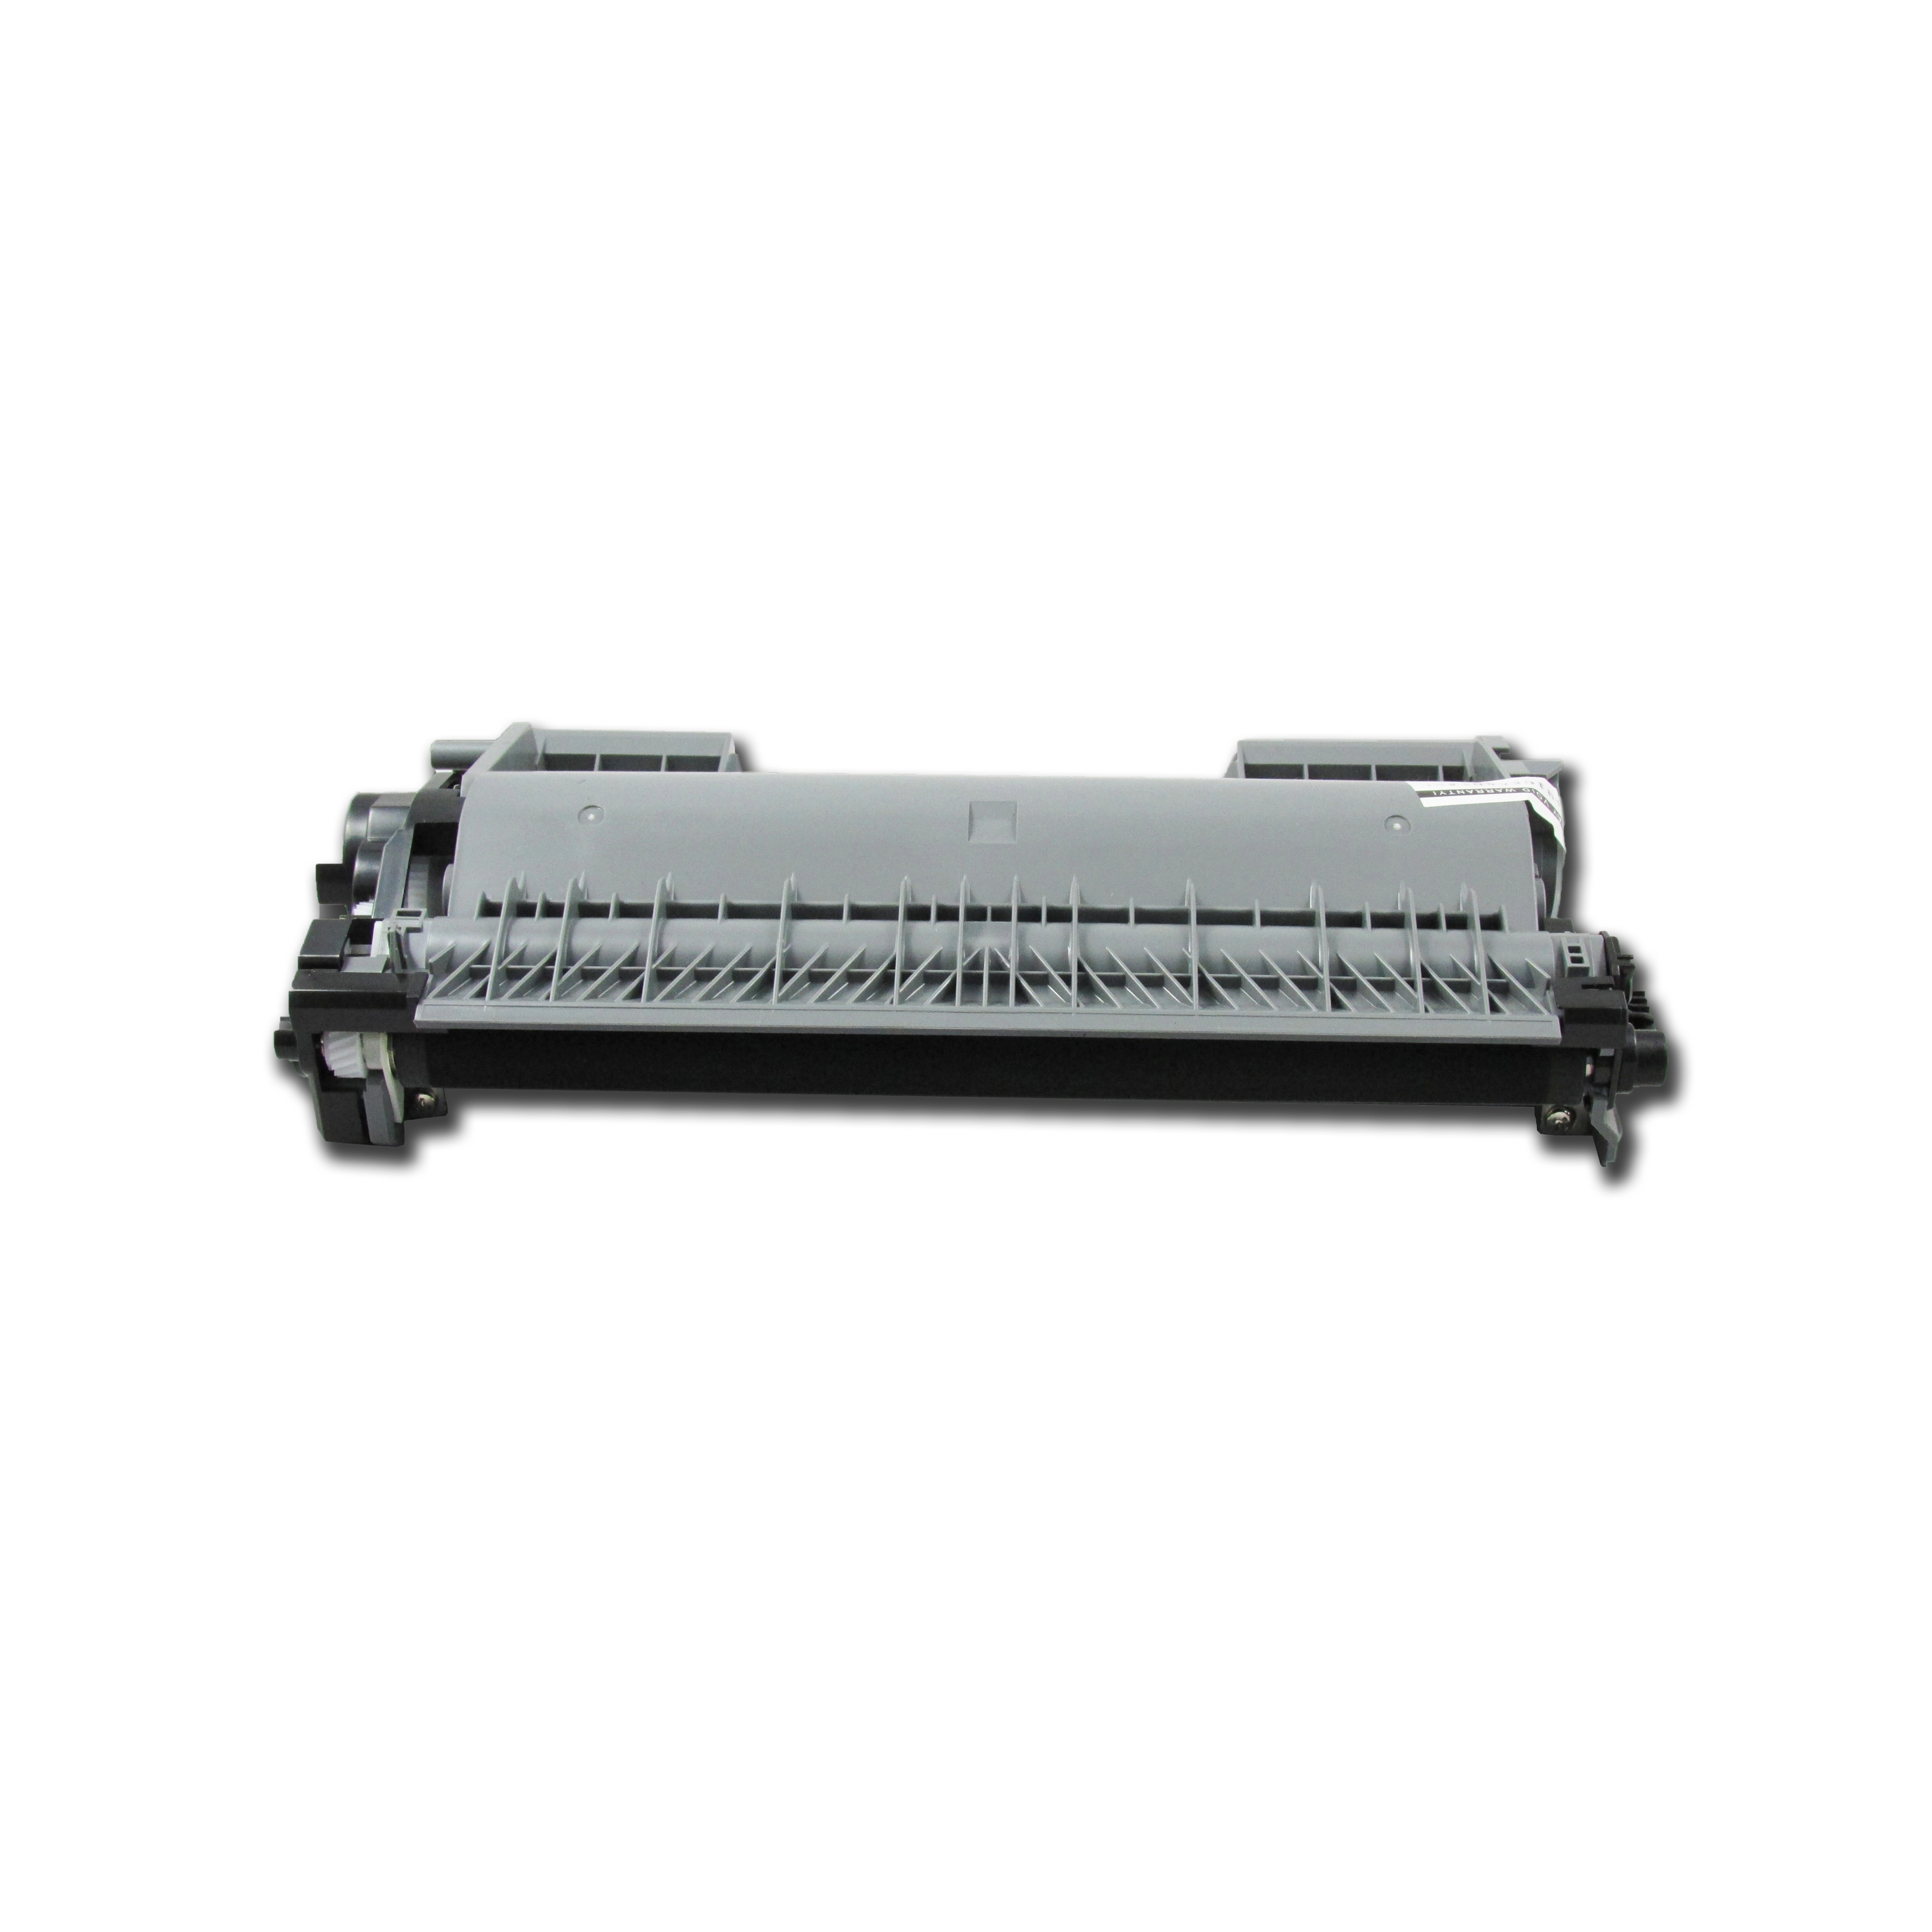 TN2240 toner cartridge Use For BROTHER DCP7060D, DCP7065DN.etc